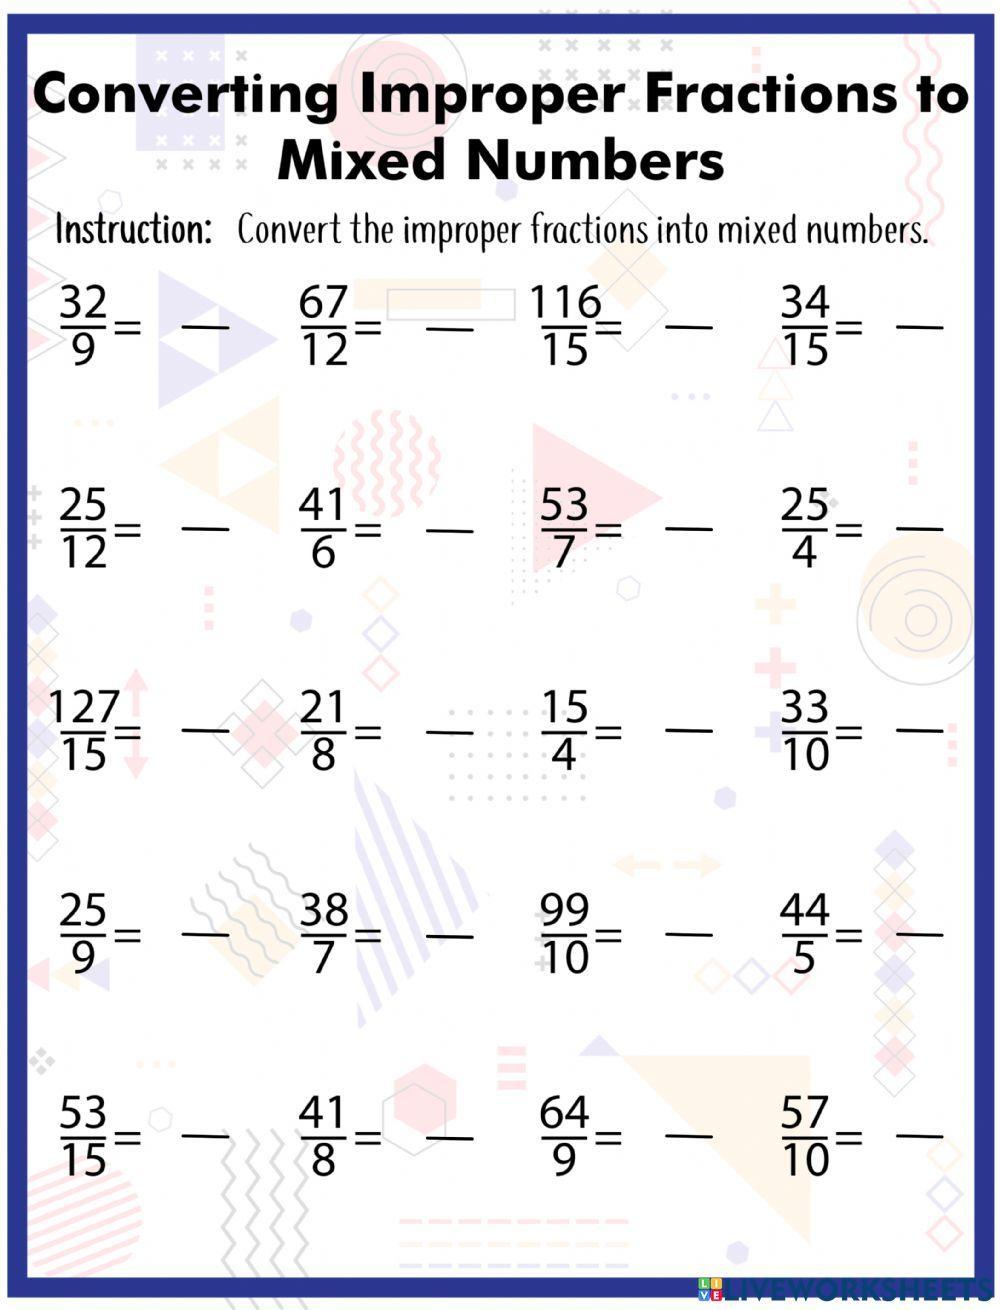 Instructions: Convert the mixed numbers into improper fractions.